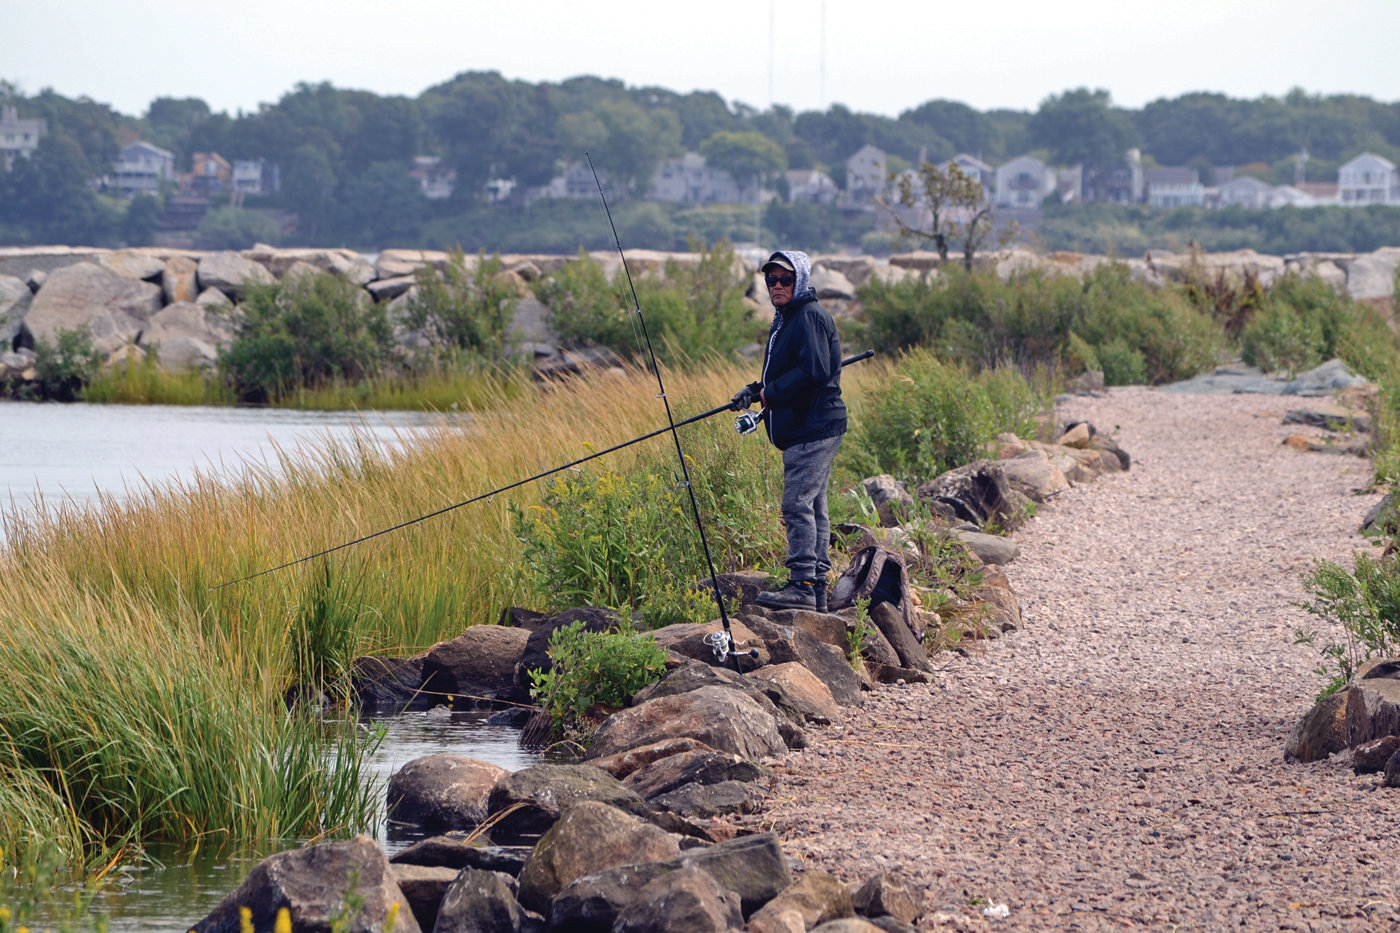 NEW LIFE: A fisherman (who declined to identify himself) peacefully watches his lines from the newly refurbished causeway leading to the breakwater at Salter Grove Memorial Park while finishing up a morning of fishing.